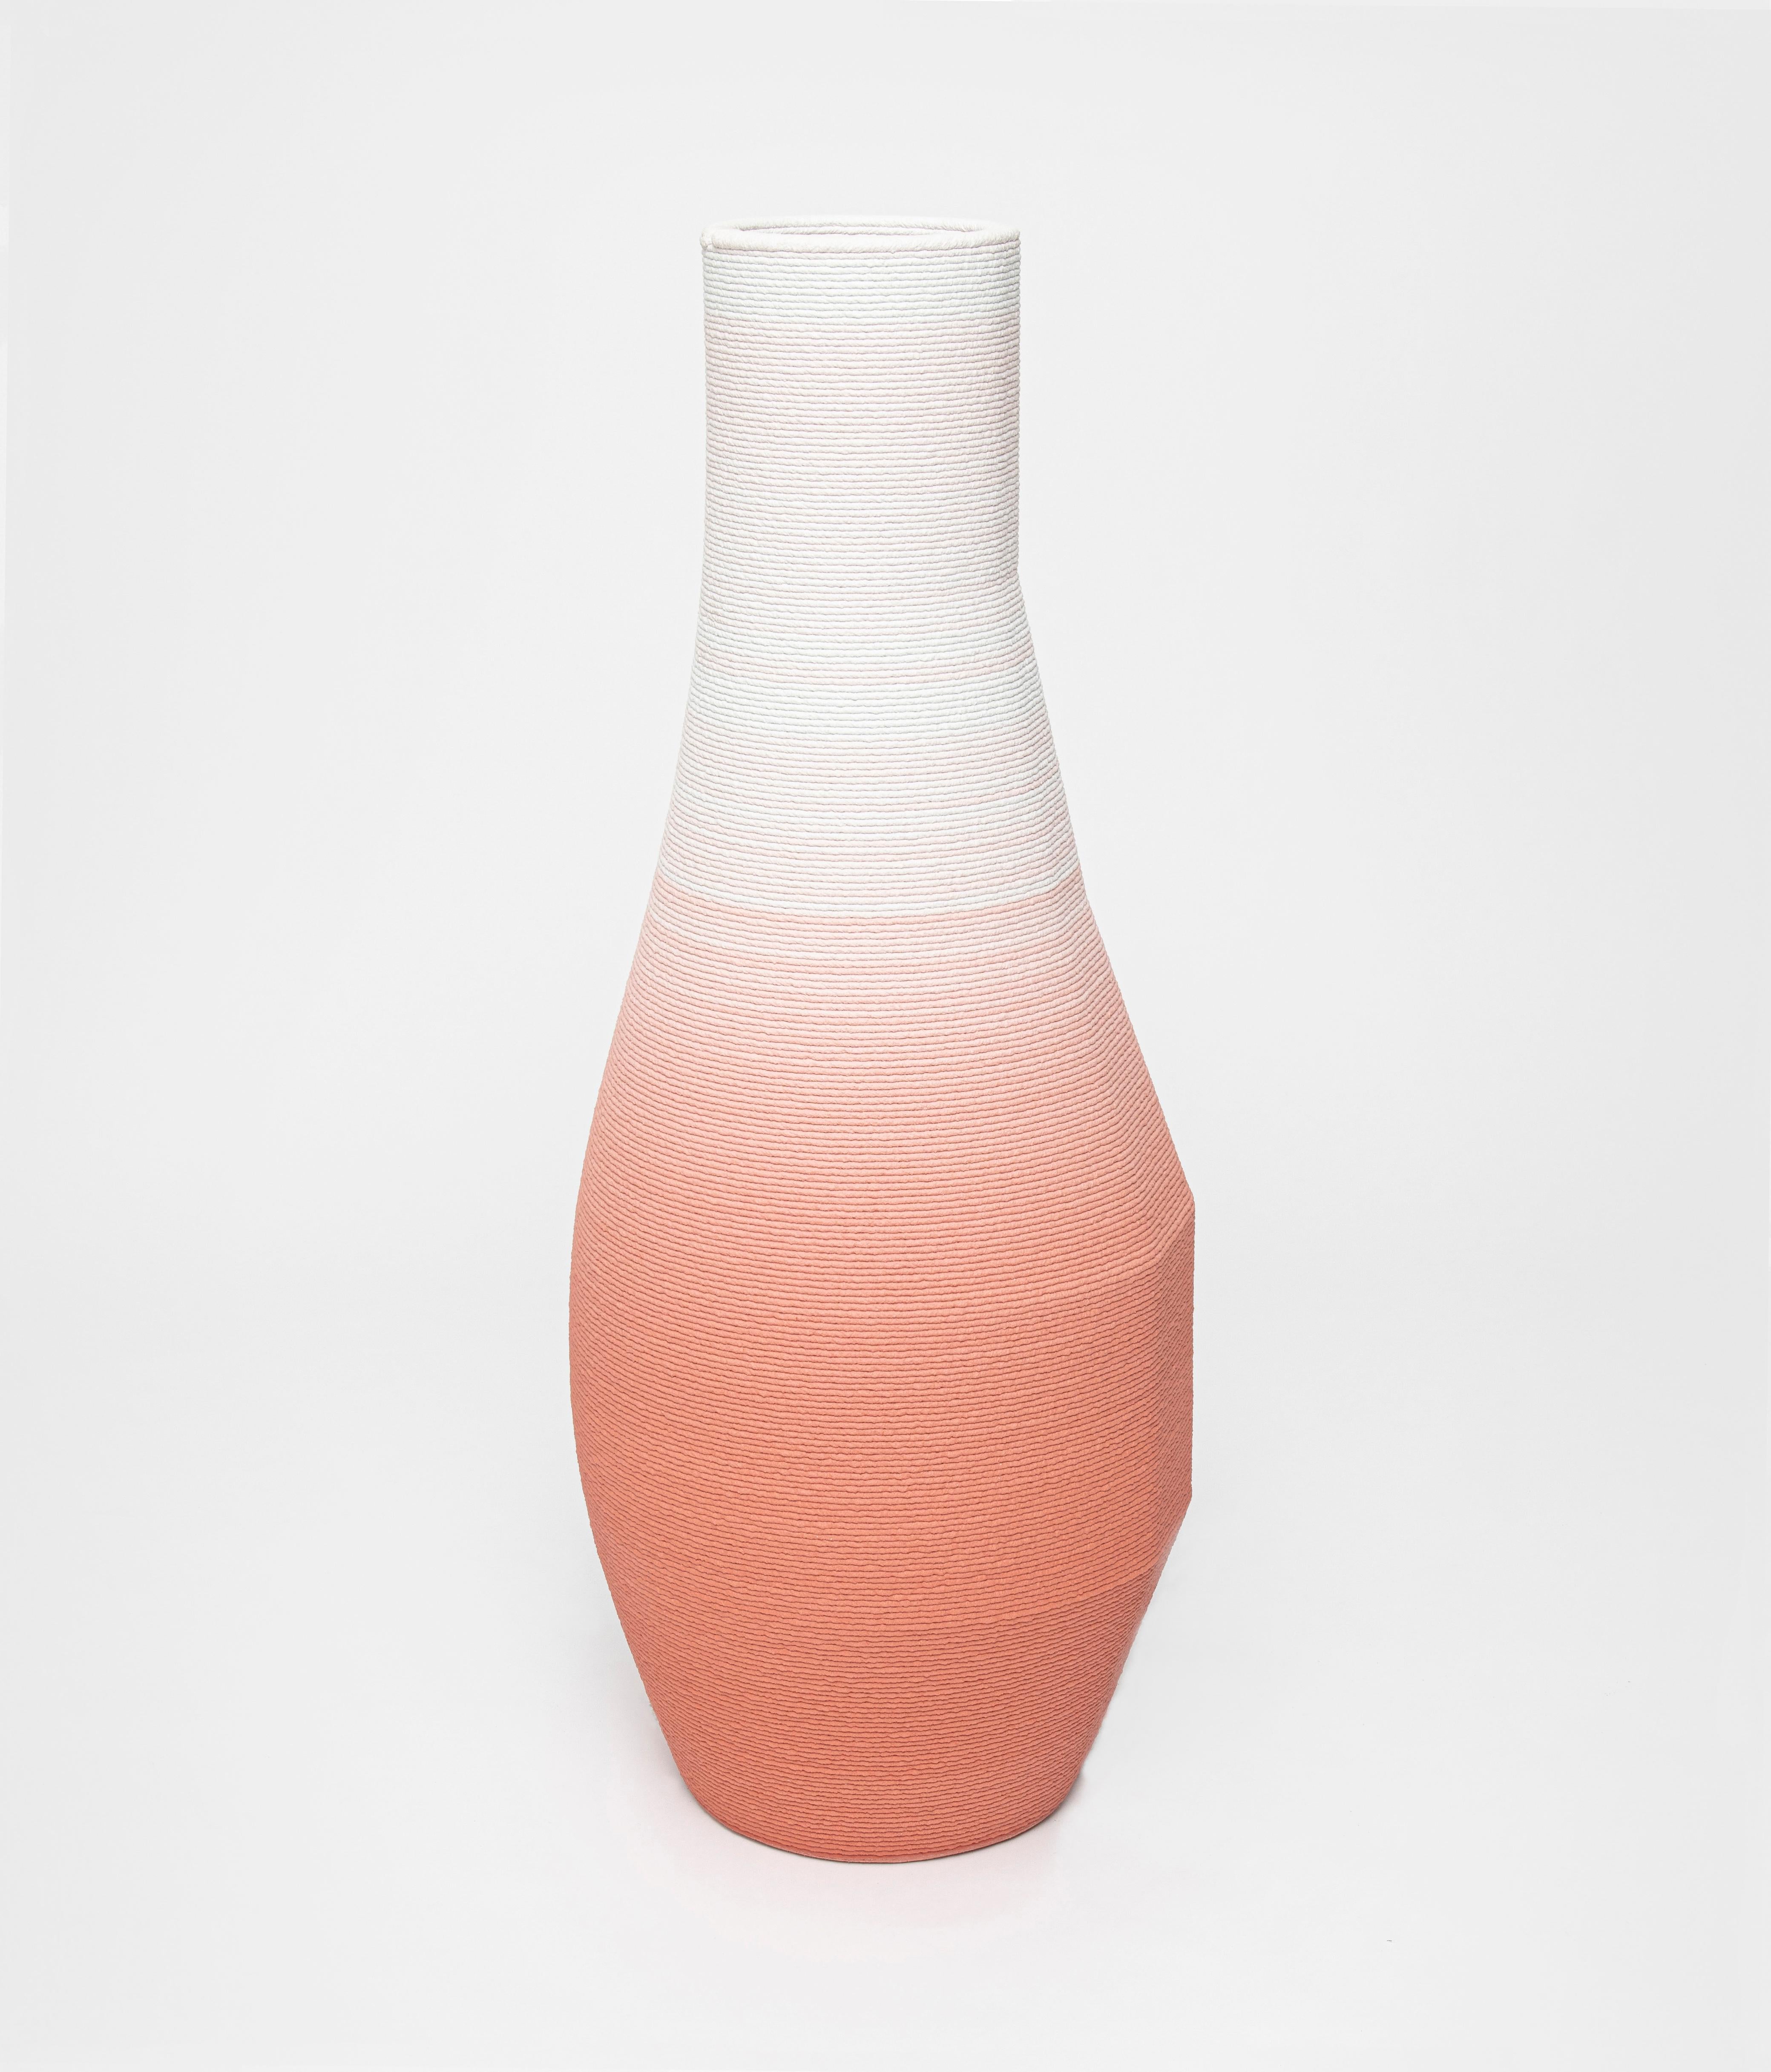 Large gradient vase by Philipp Aduatz
Limited Edition of 50
Dimensions: 60 x 60 x 152 cm
Materials: 3D printed concrete dyed, reinforced with steel

Available in red, blue, beige, green and black.

The 3D printed gradient furniture collection